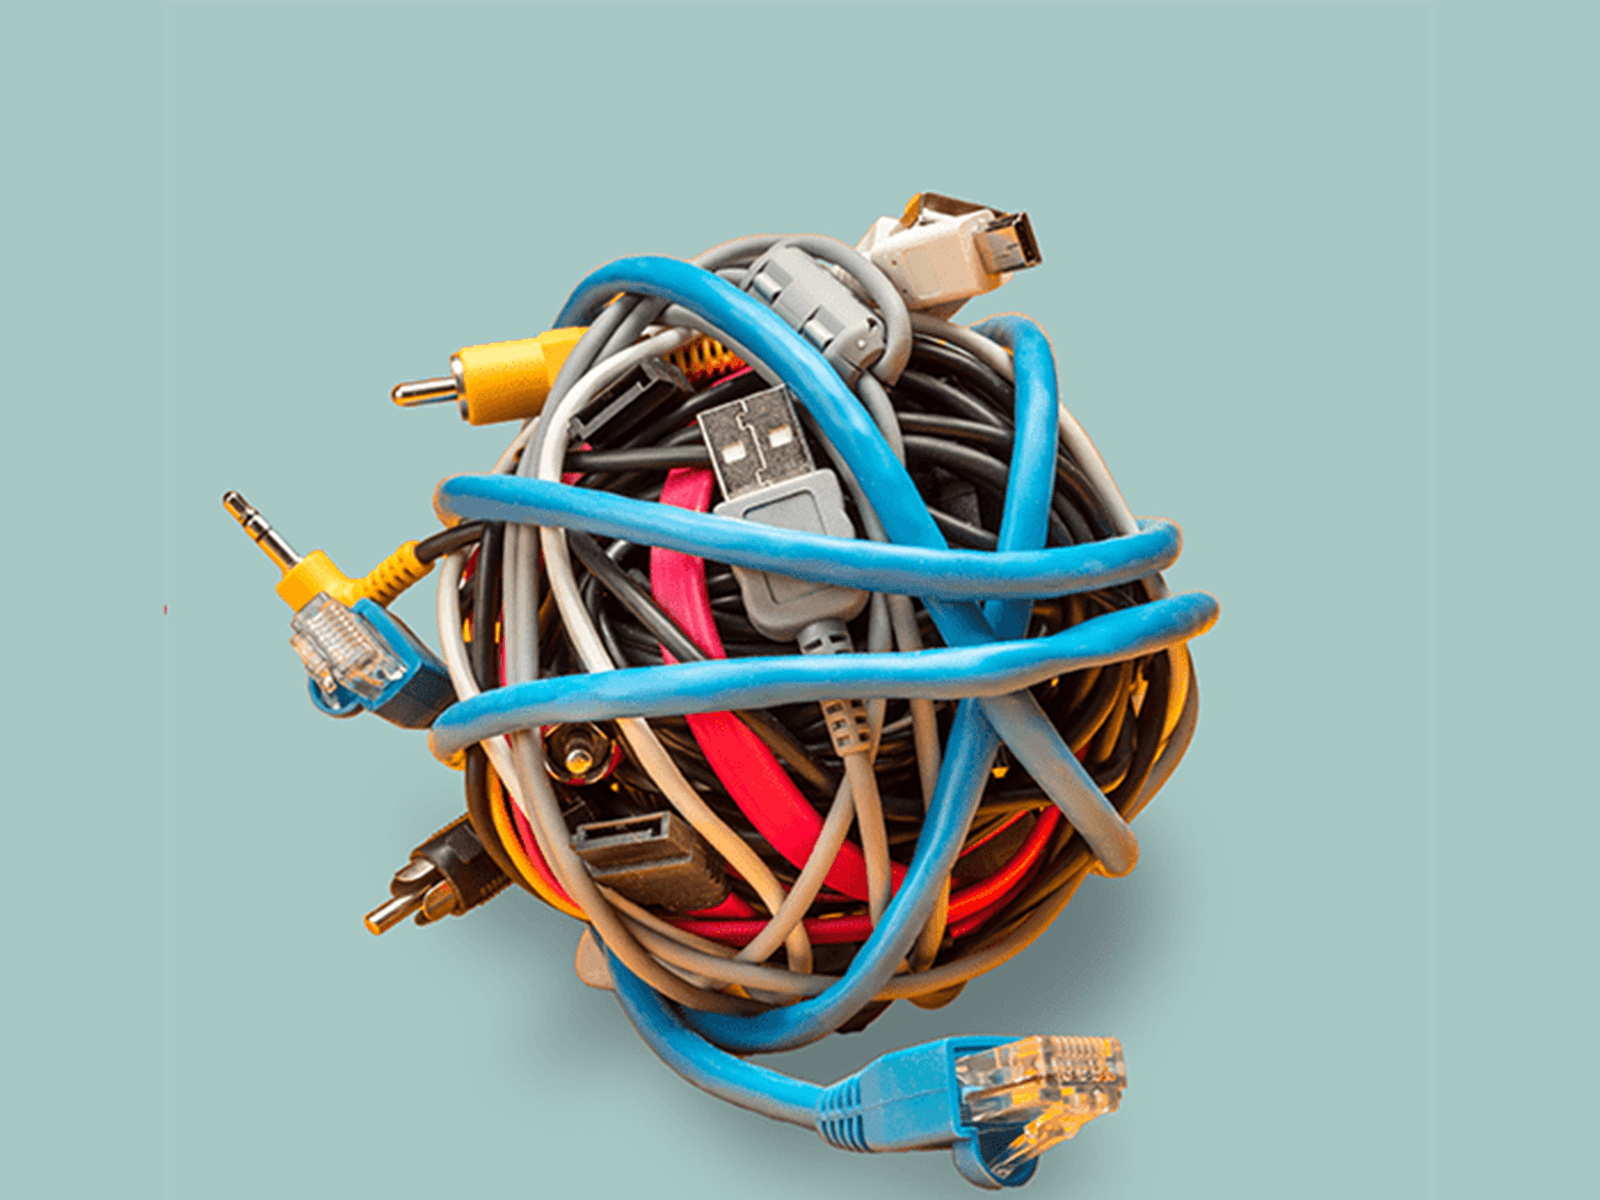 A ball of cables